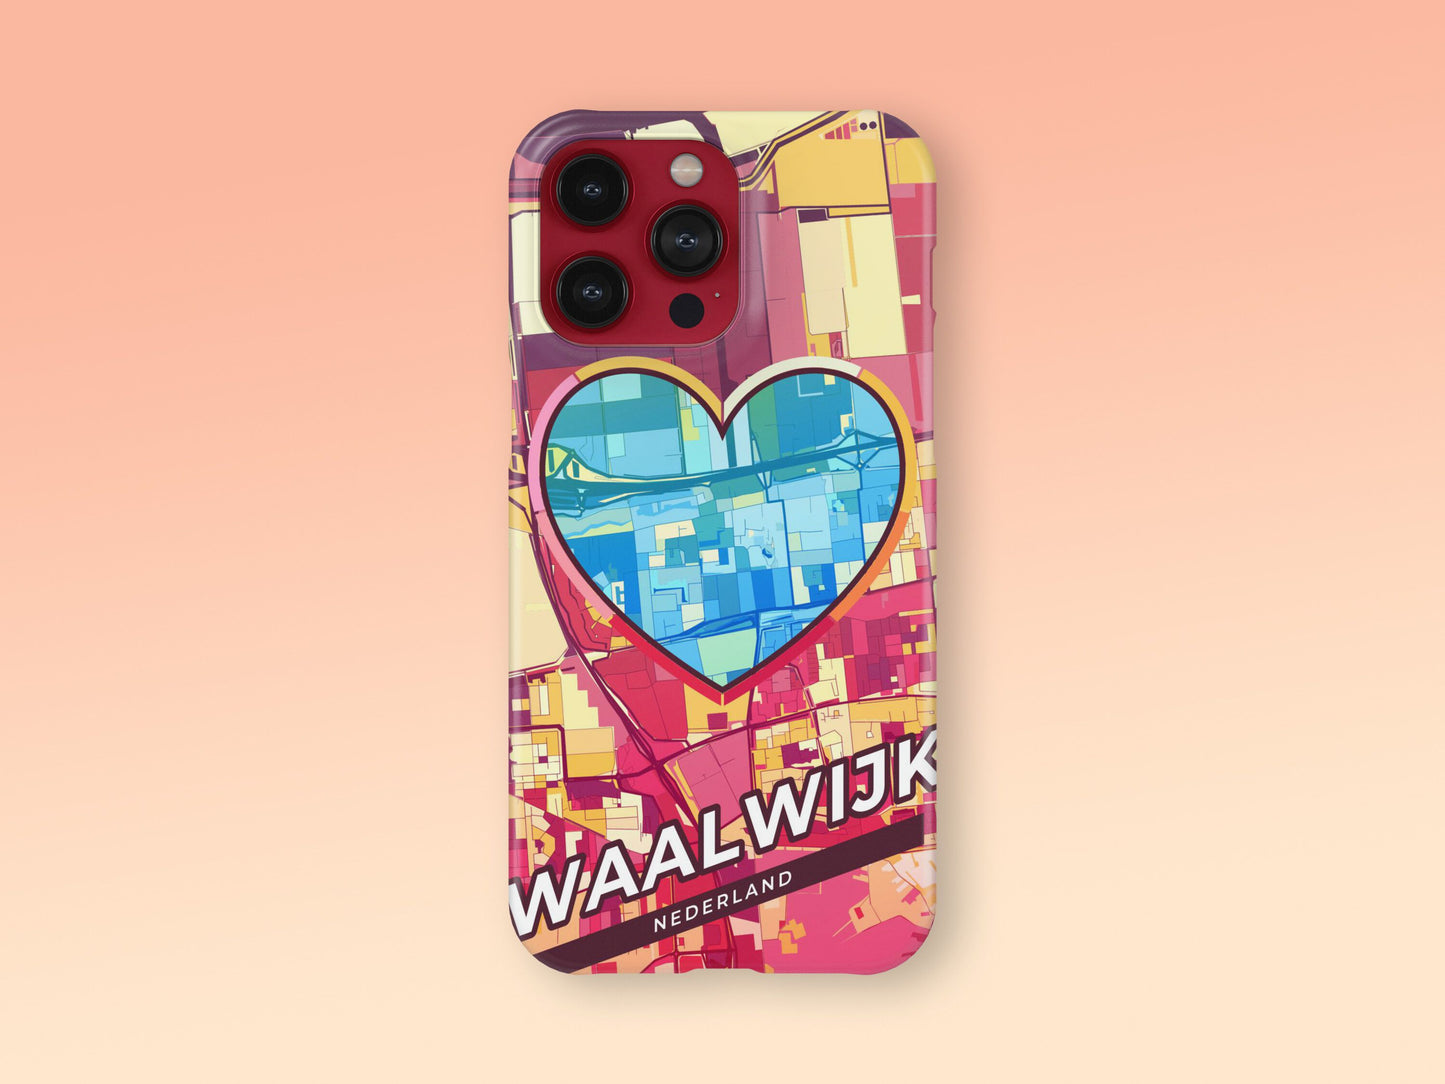 Waalwijk Netherlands slim phone case with colorful icon 2